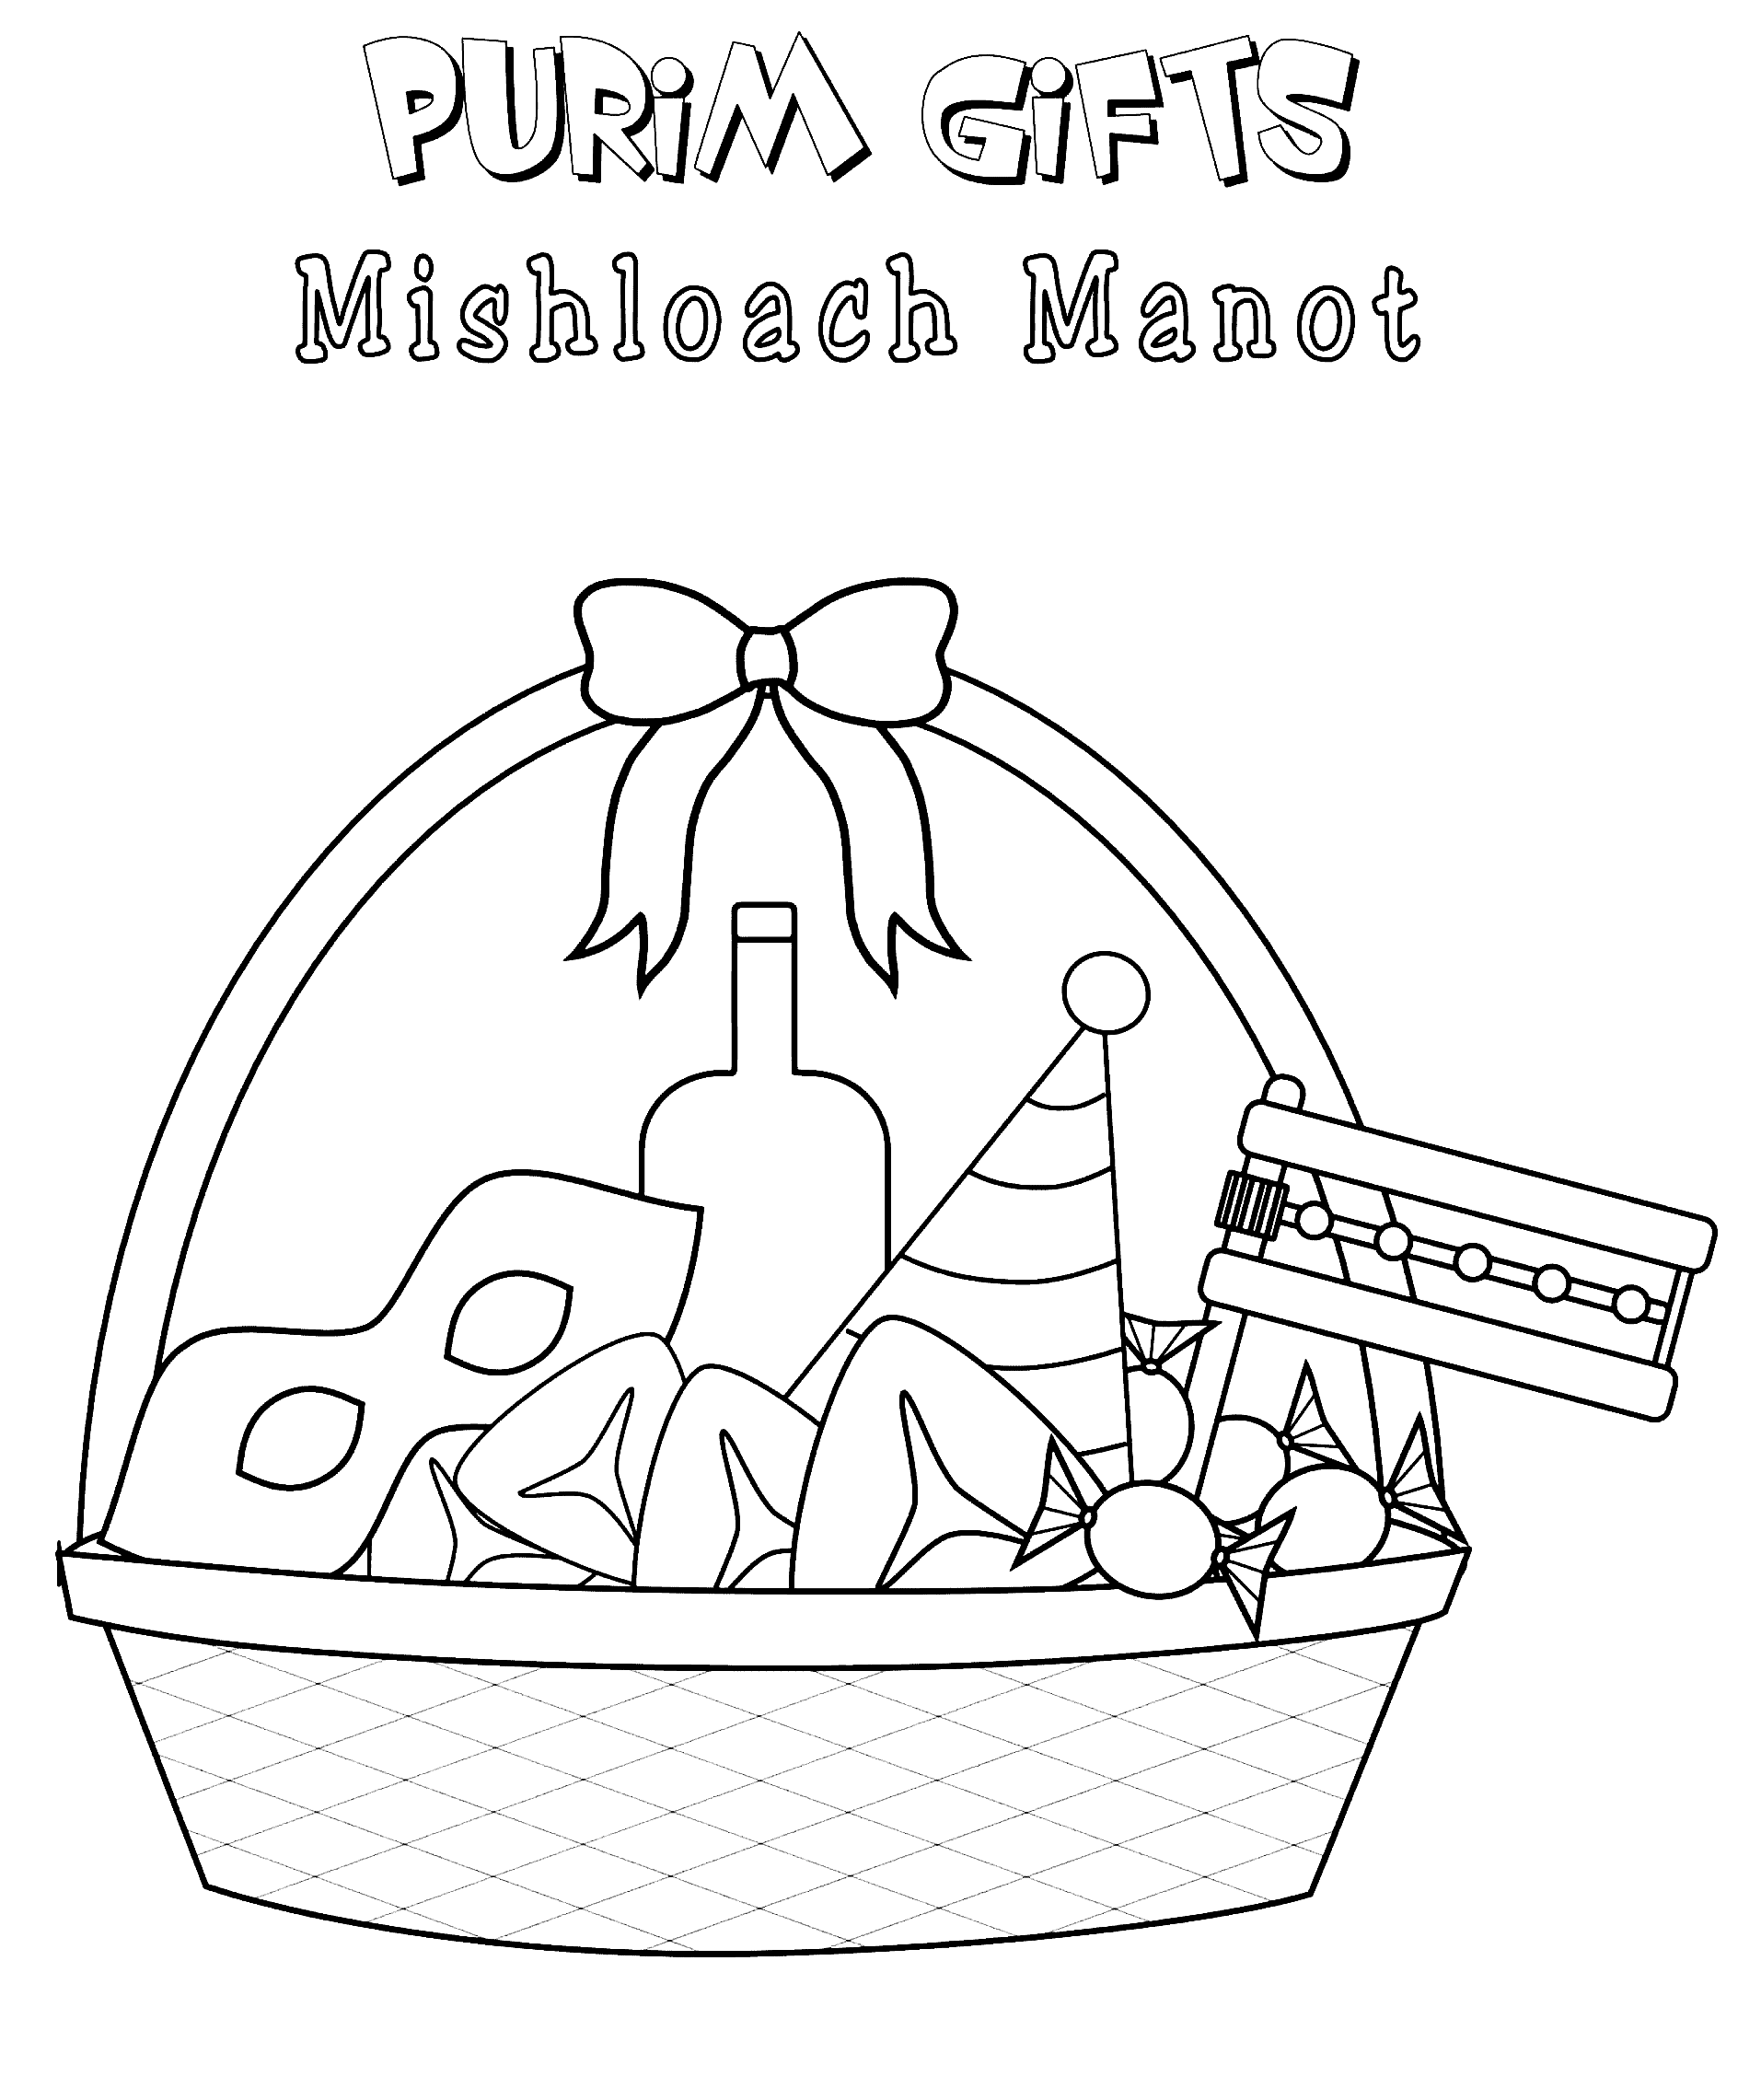 Purim Gifts Mishloach Manot Coloring Pages